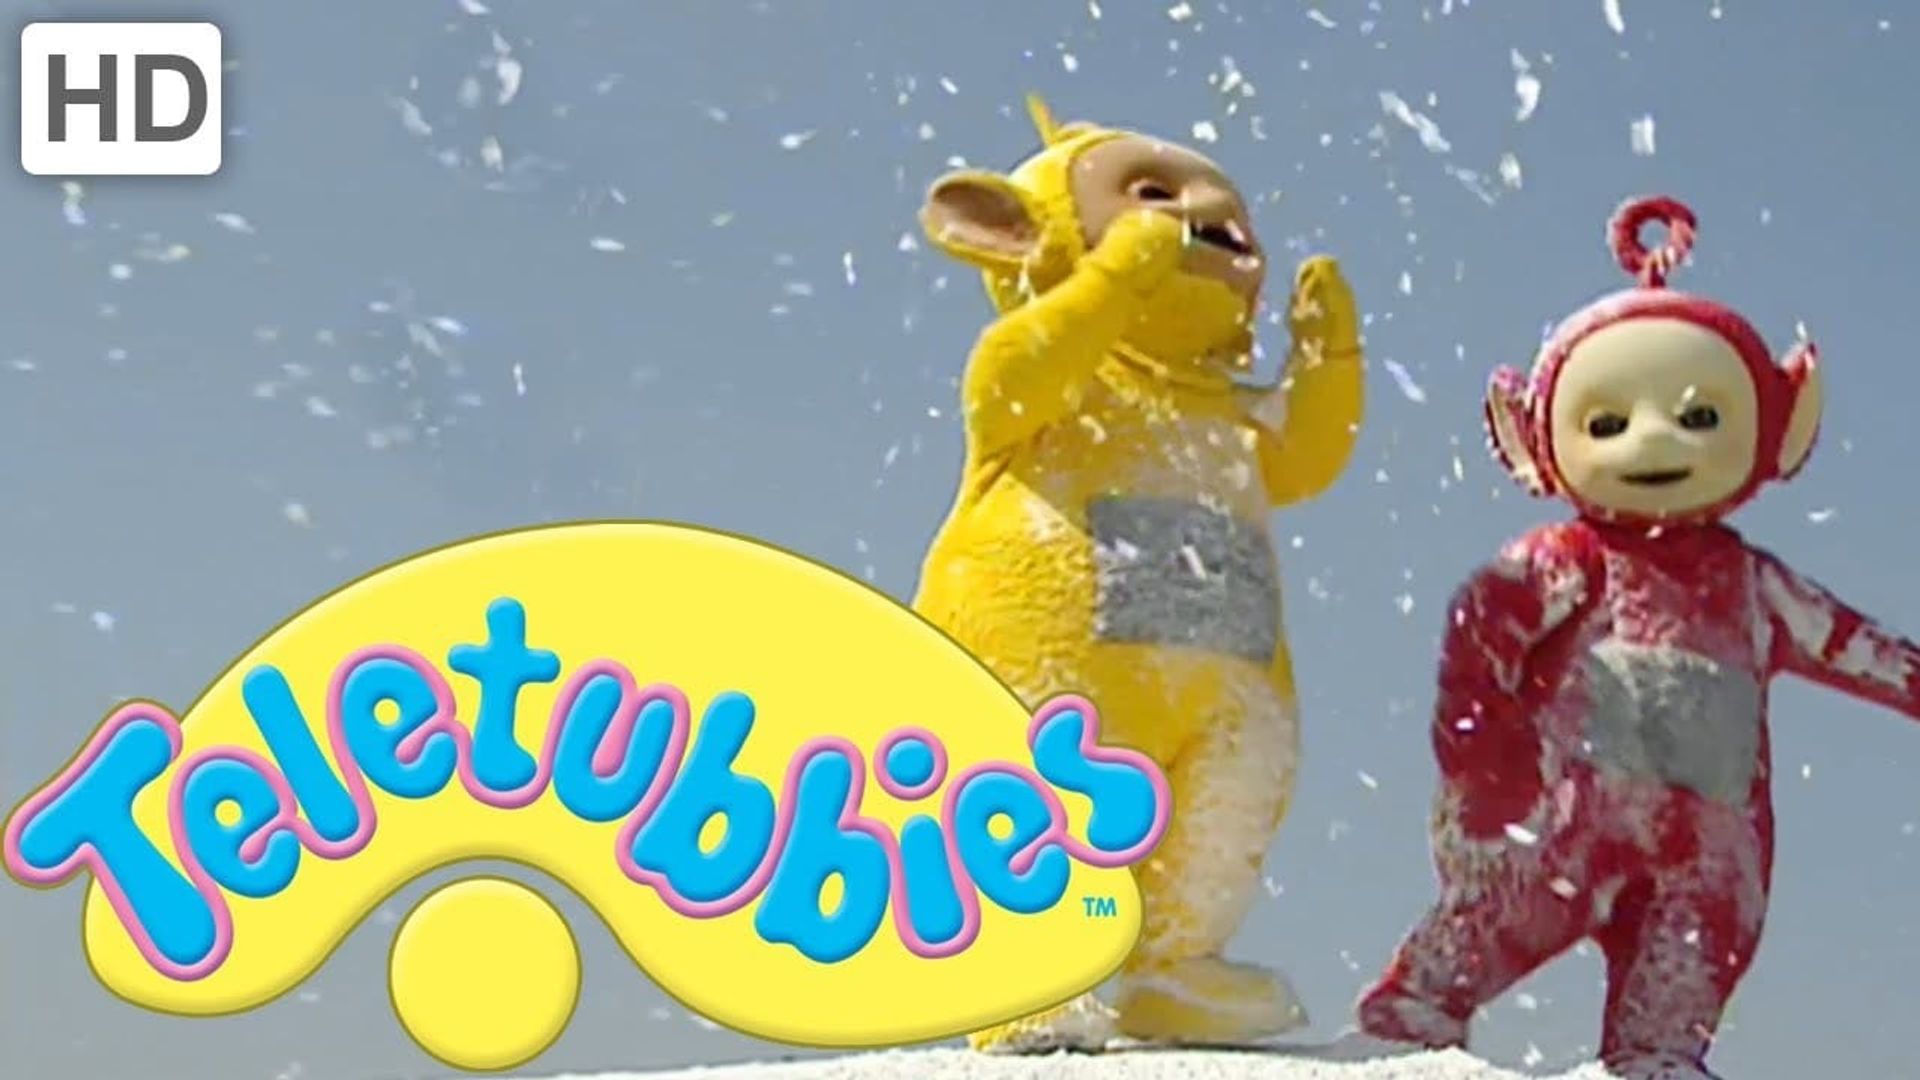 Teletubbies: Christmas in the Snow background